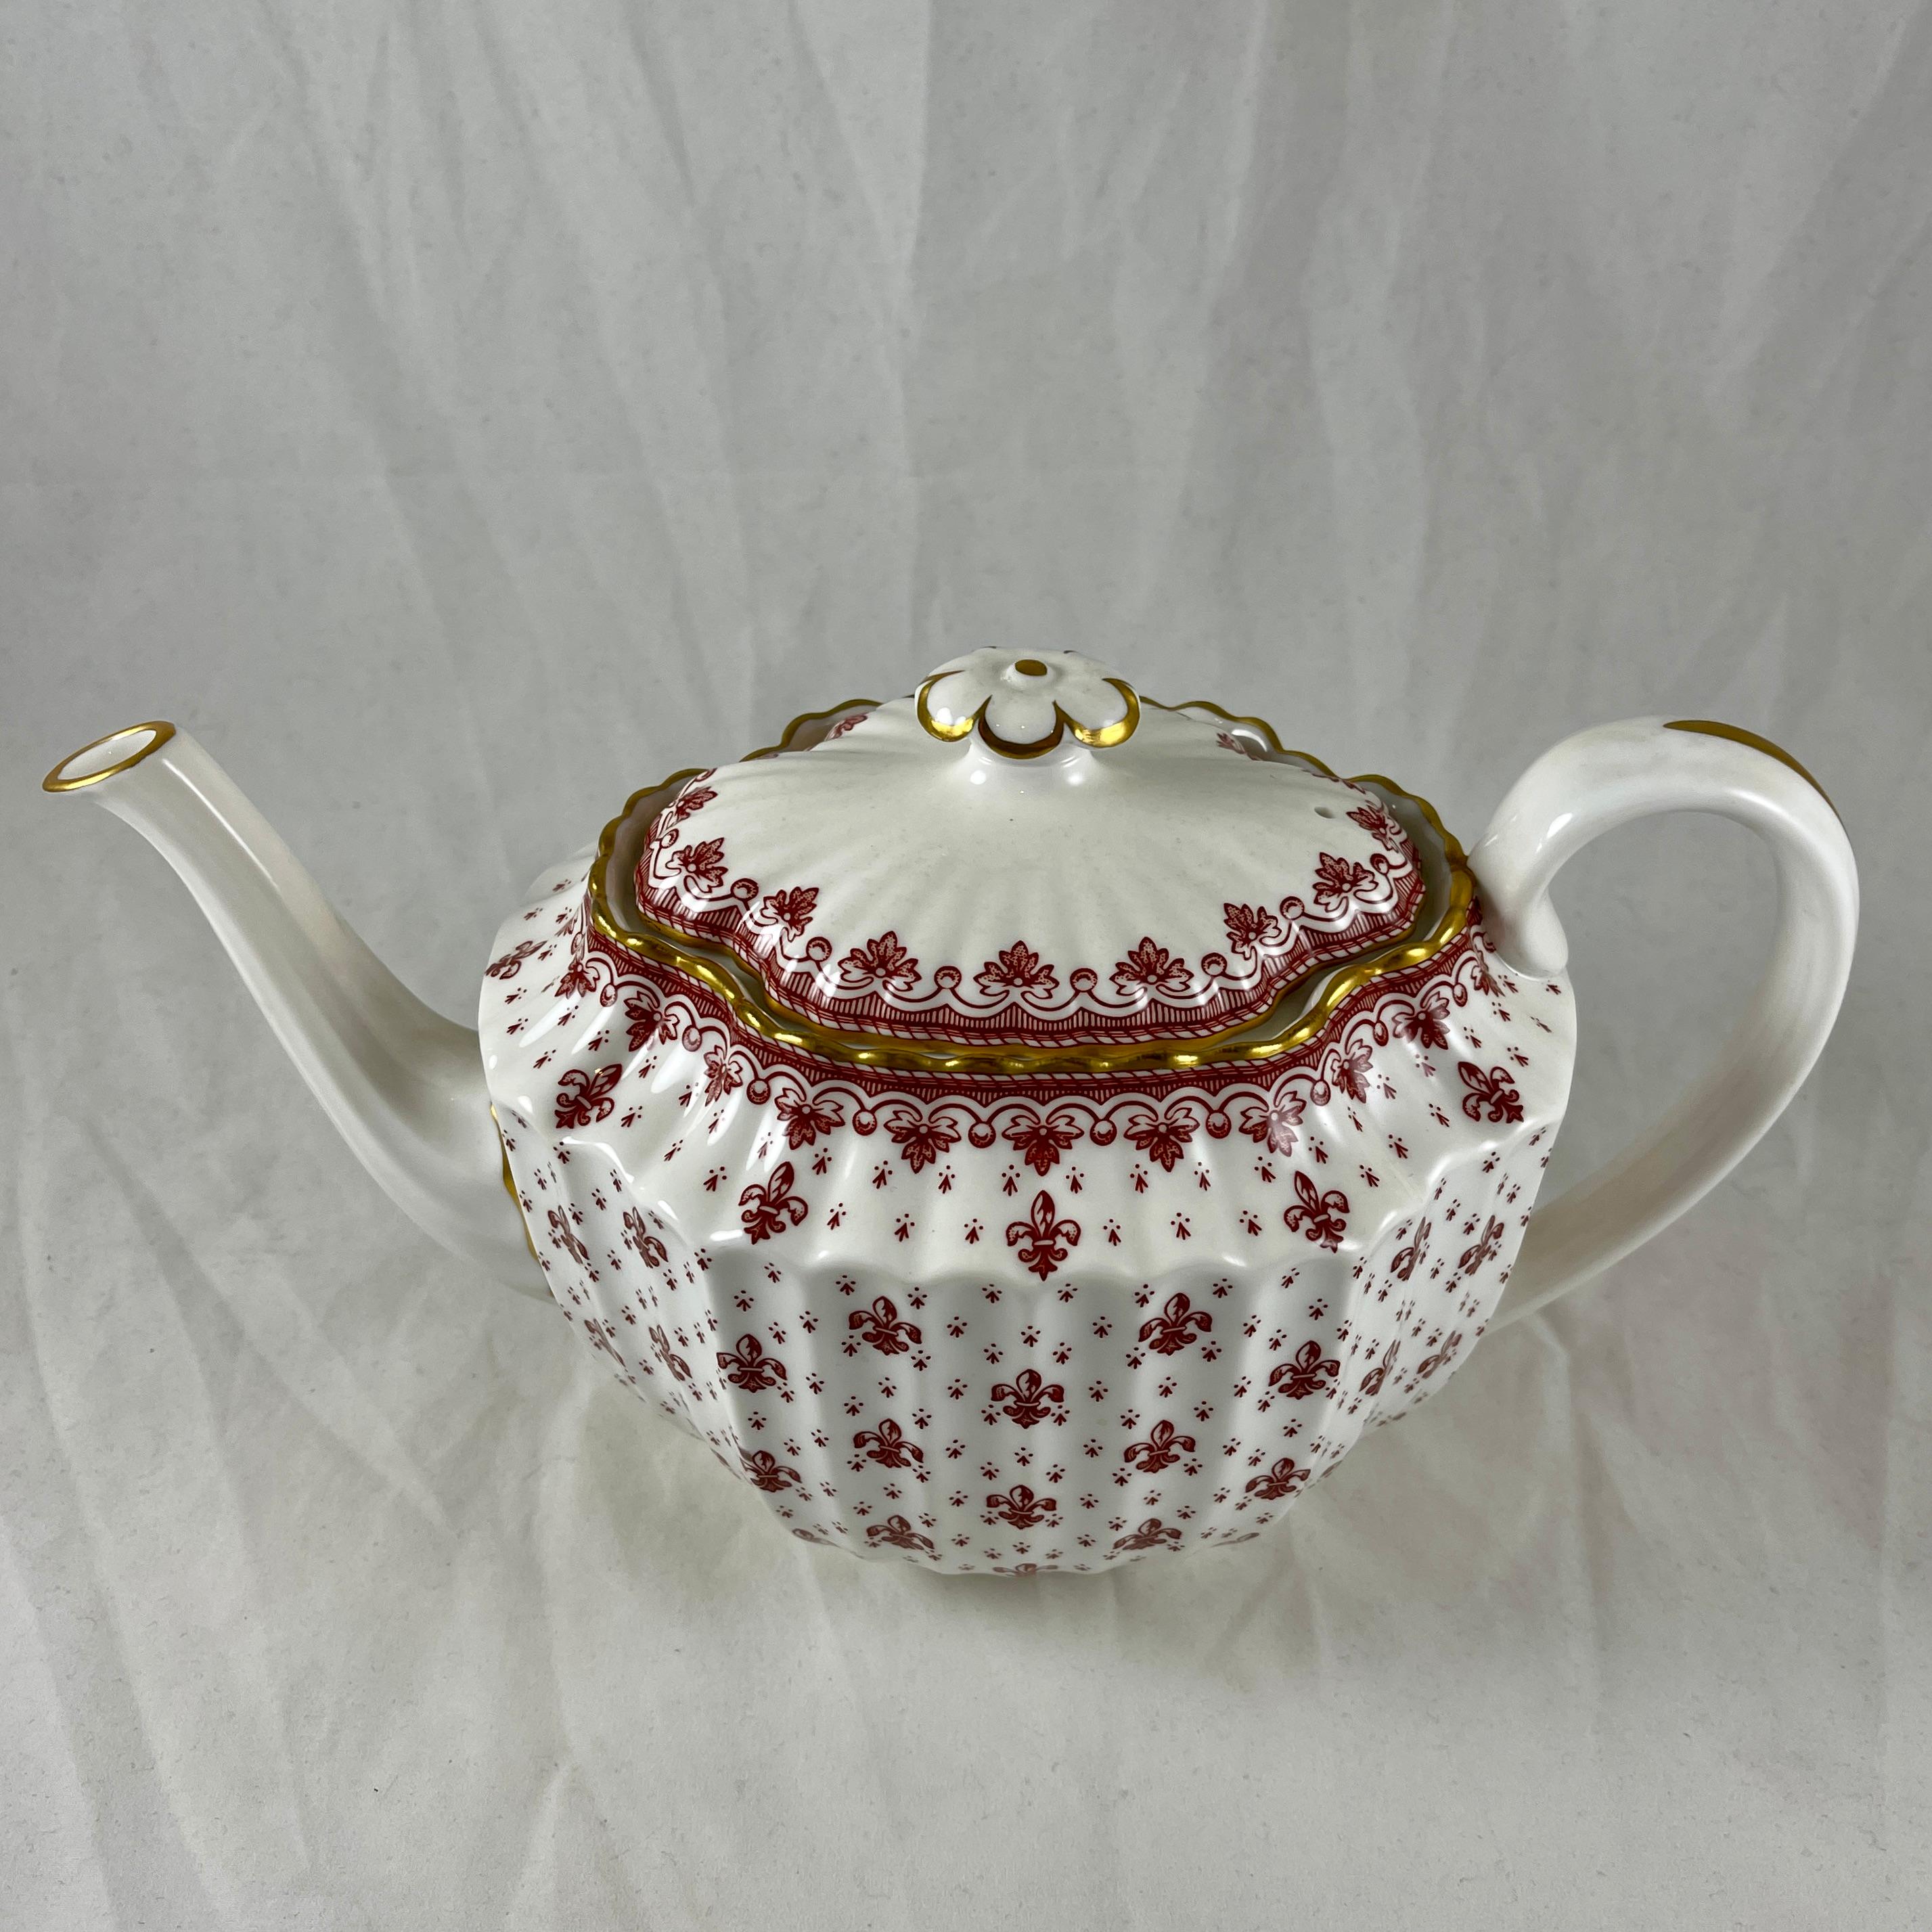 From Spode, England, a Fleur De Lys-Red Tea Pot in the fluted Chelsea shape.

The Fleur de Lys pattern was introduced in 1961 and remained active until 1994, now discontinued.

A bone china tea pot and lid, transfer printed in a bittersweet red